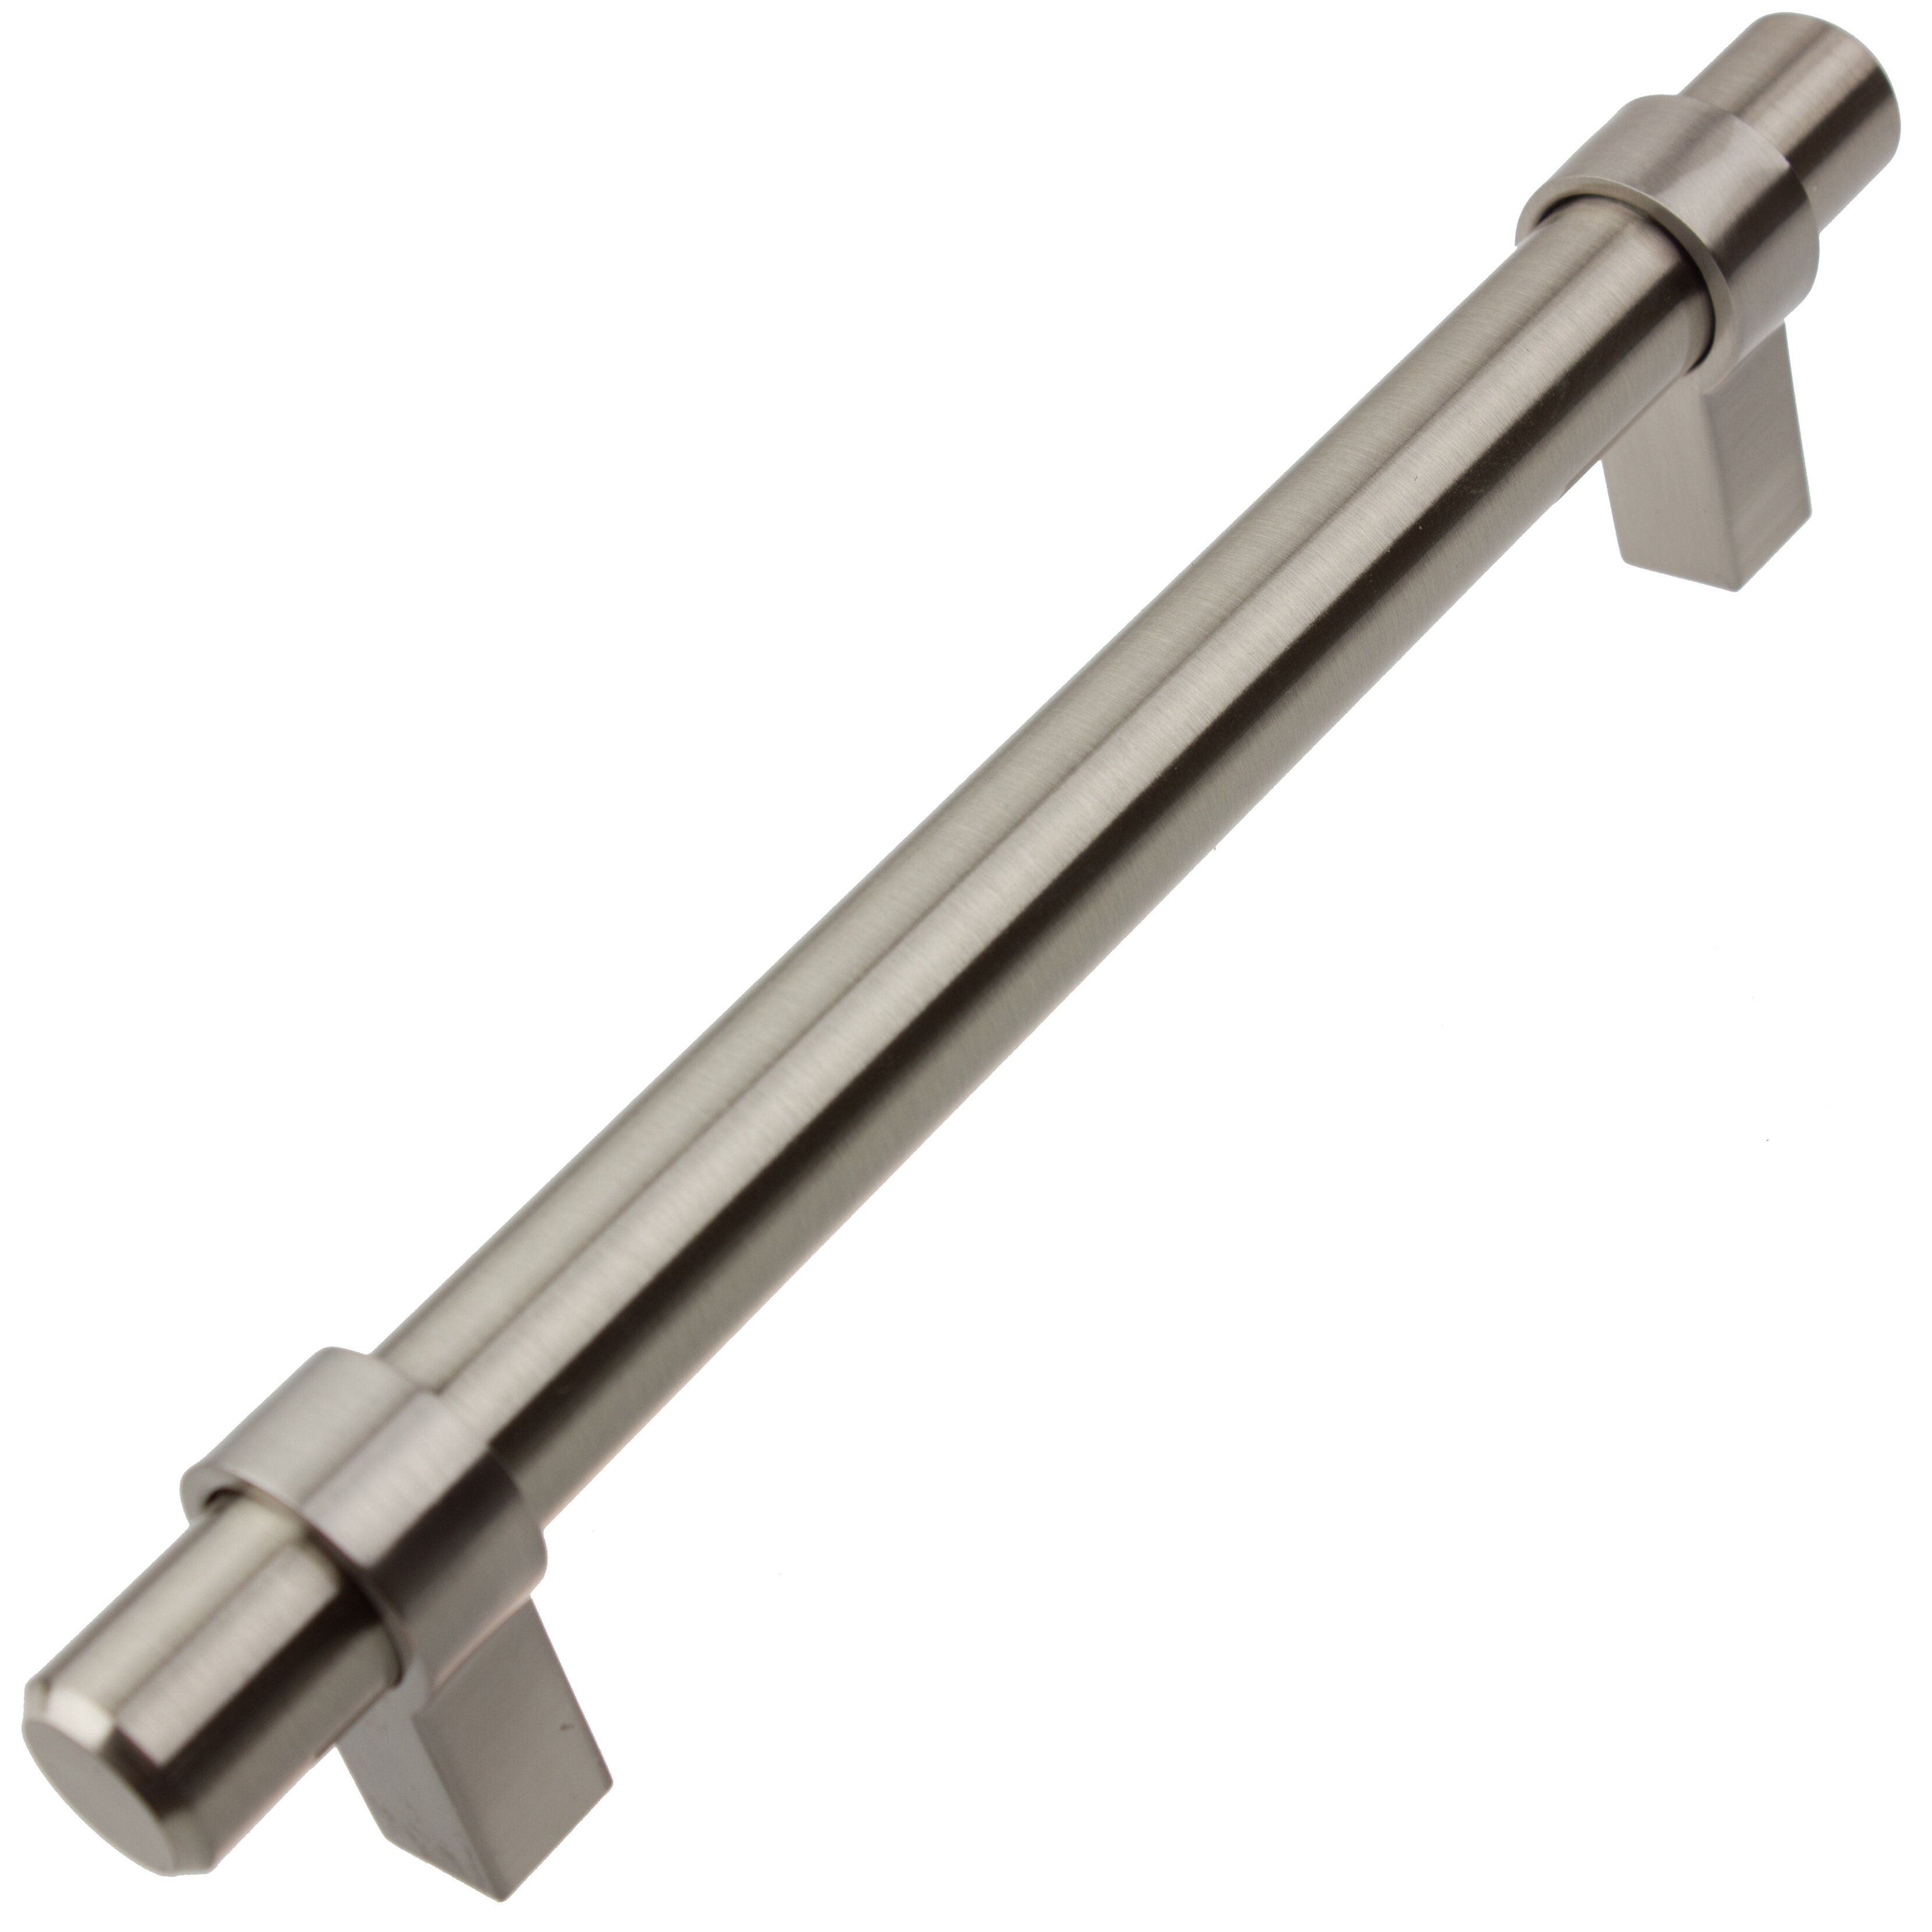 Stainless Steel Cabinet Drawer Pulls You Ll Love In 2021 Wayfair